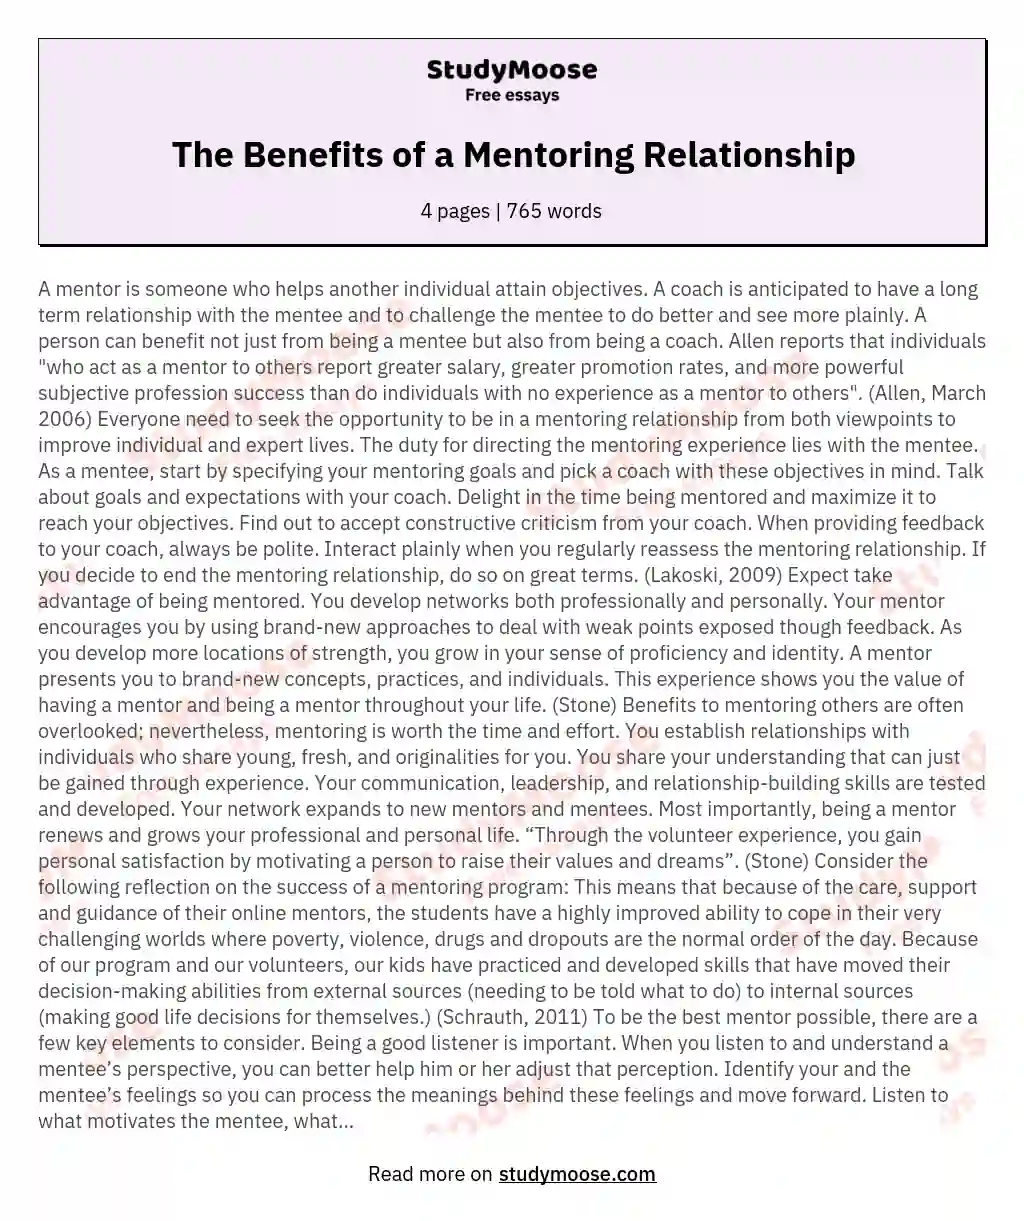 The Benefits of a Mentoring Relationship essay